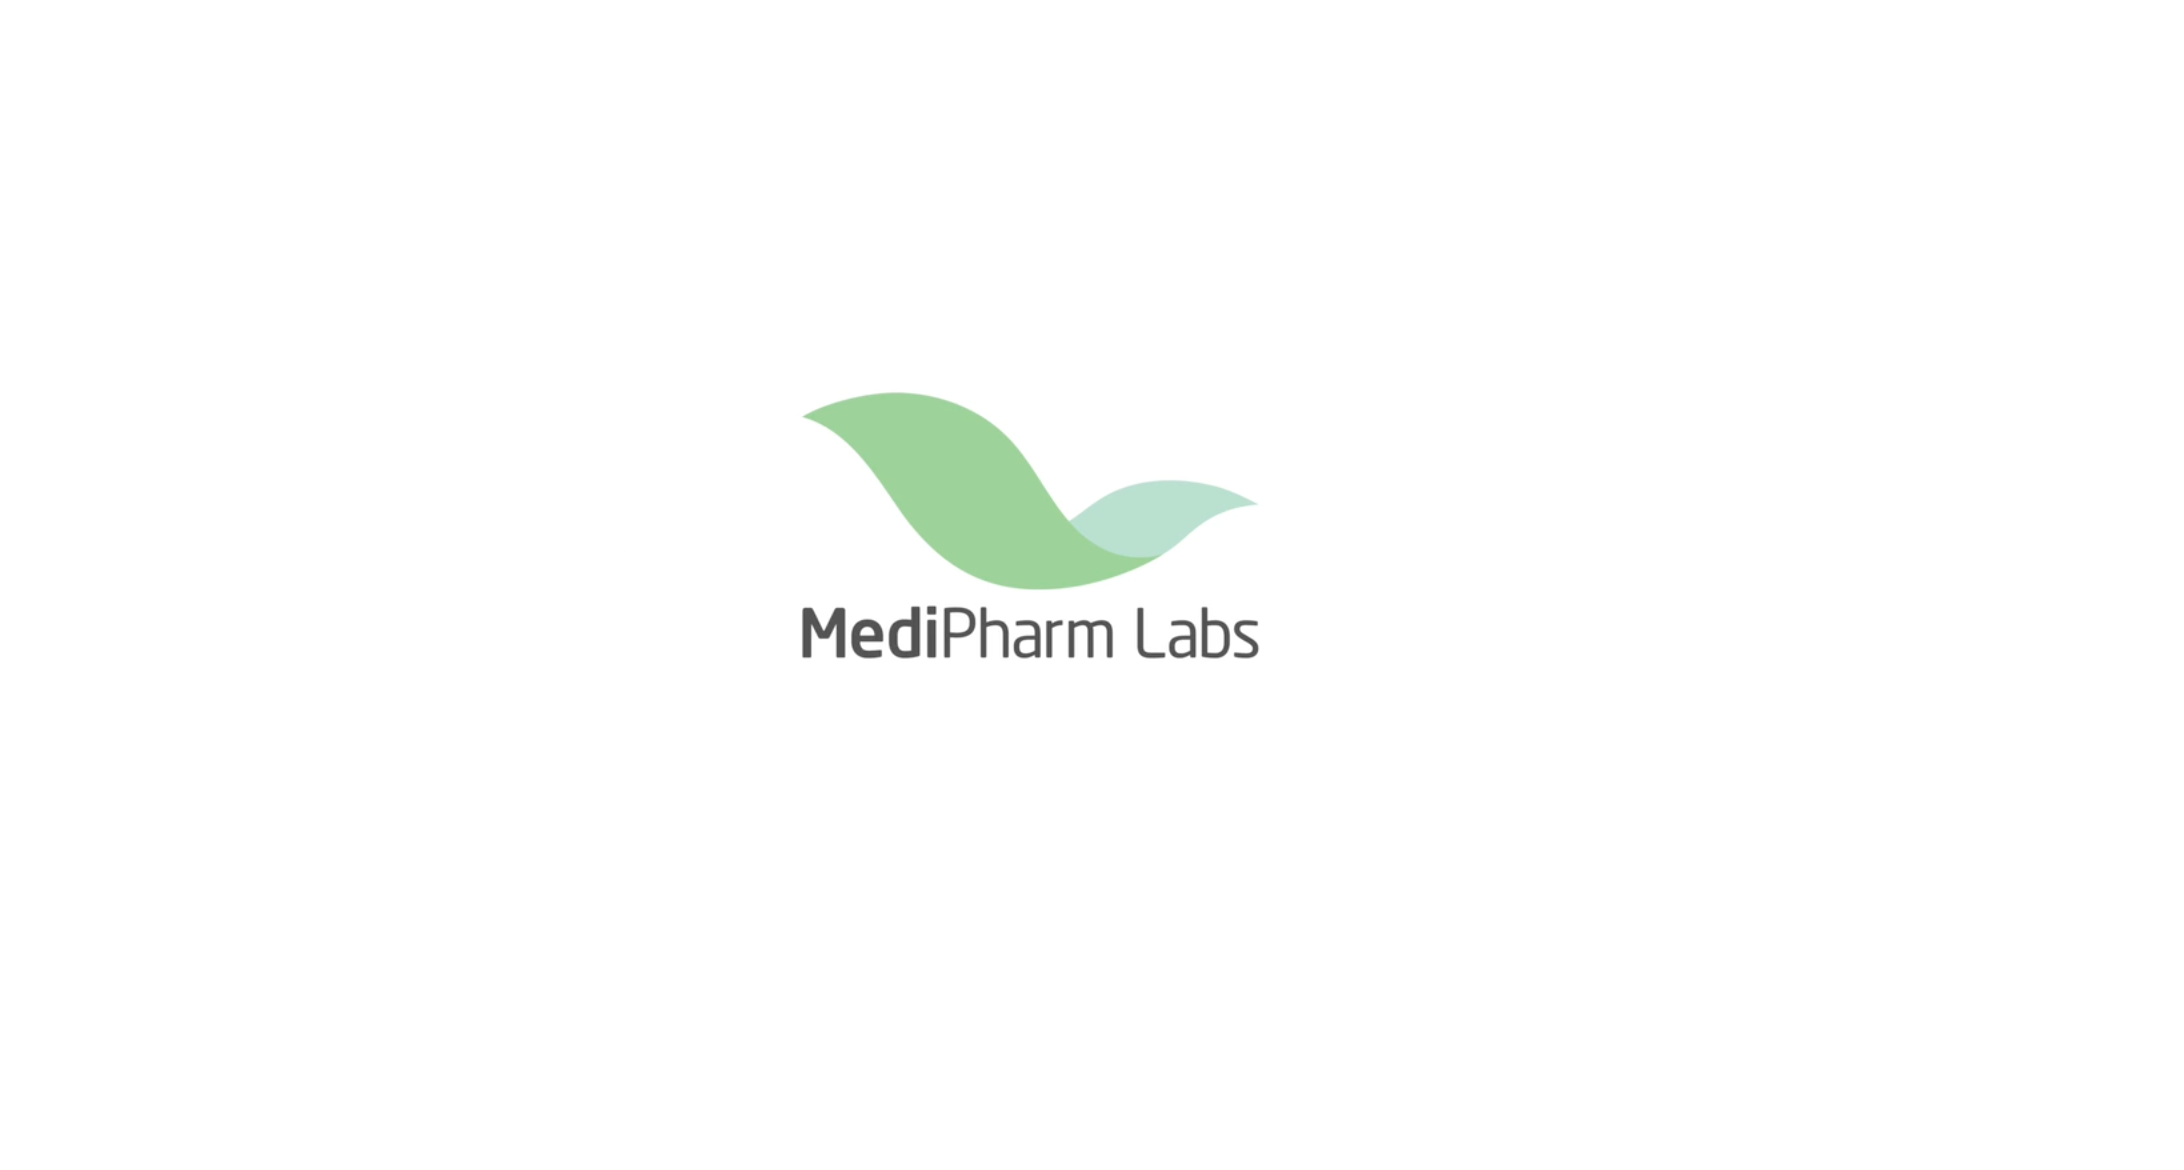 MediPharm Touts 'Transformational Year,' Posts $22.6M In Q4 Revenue